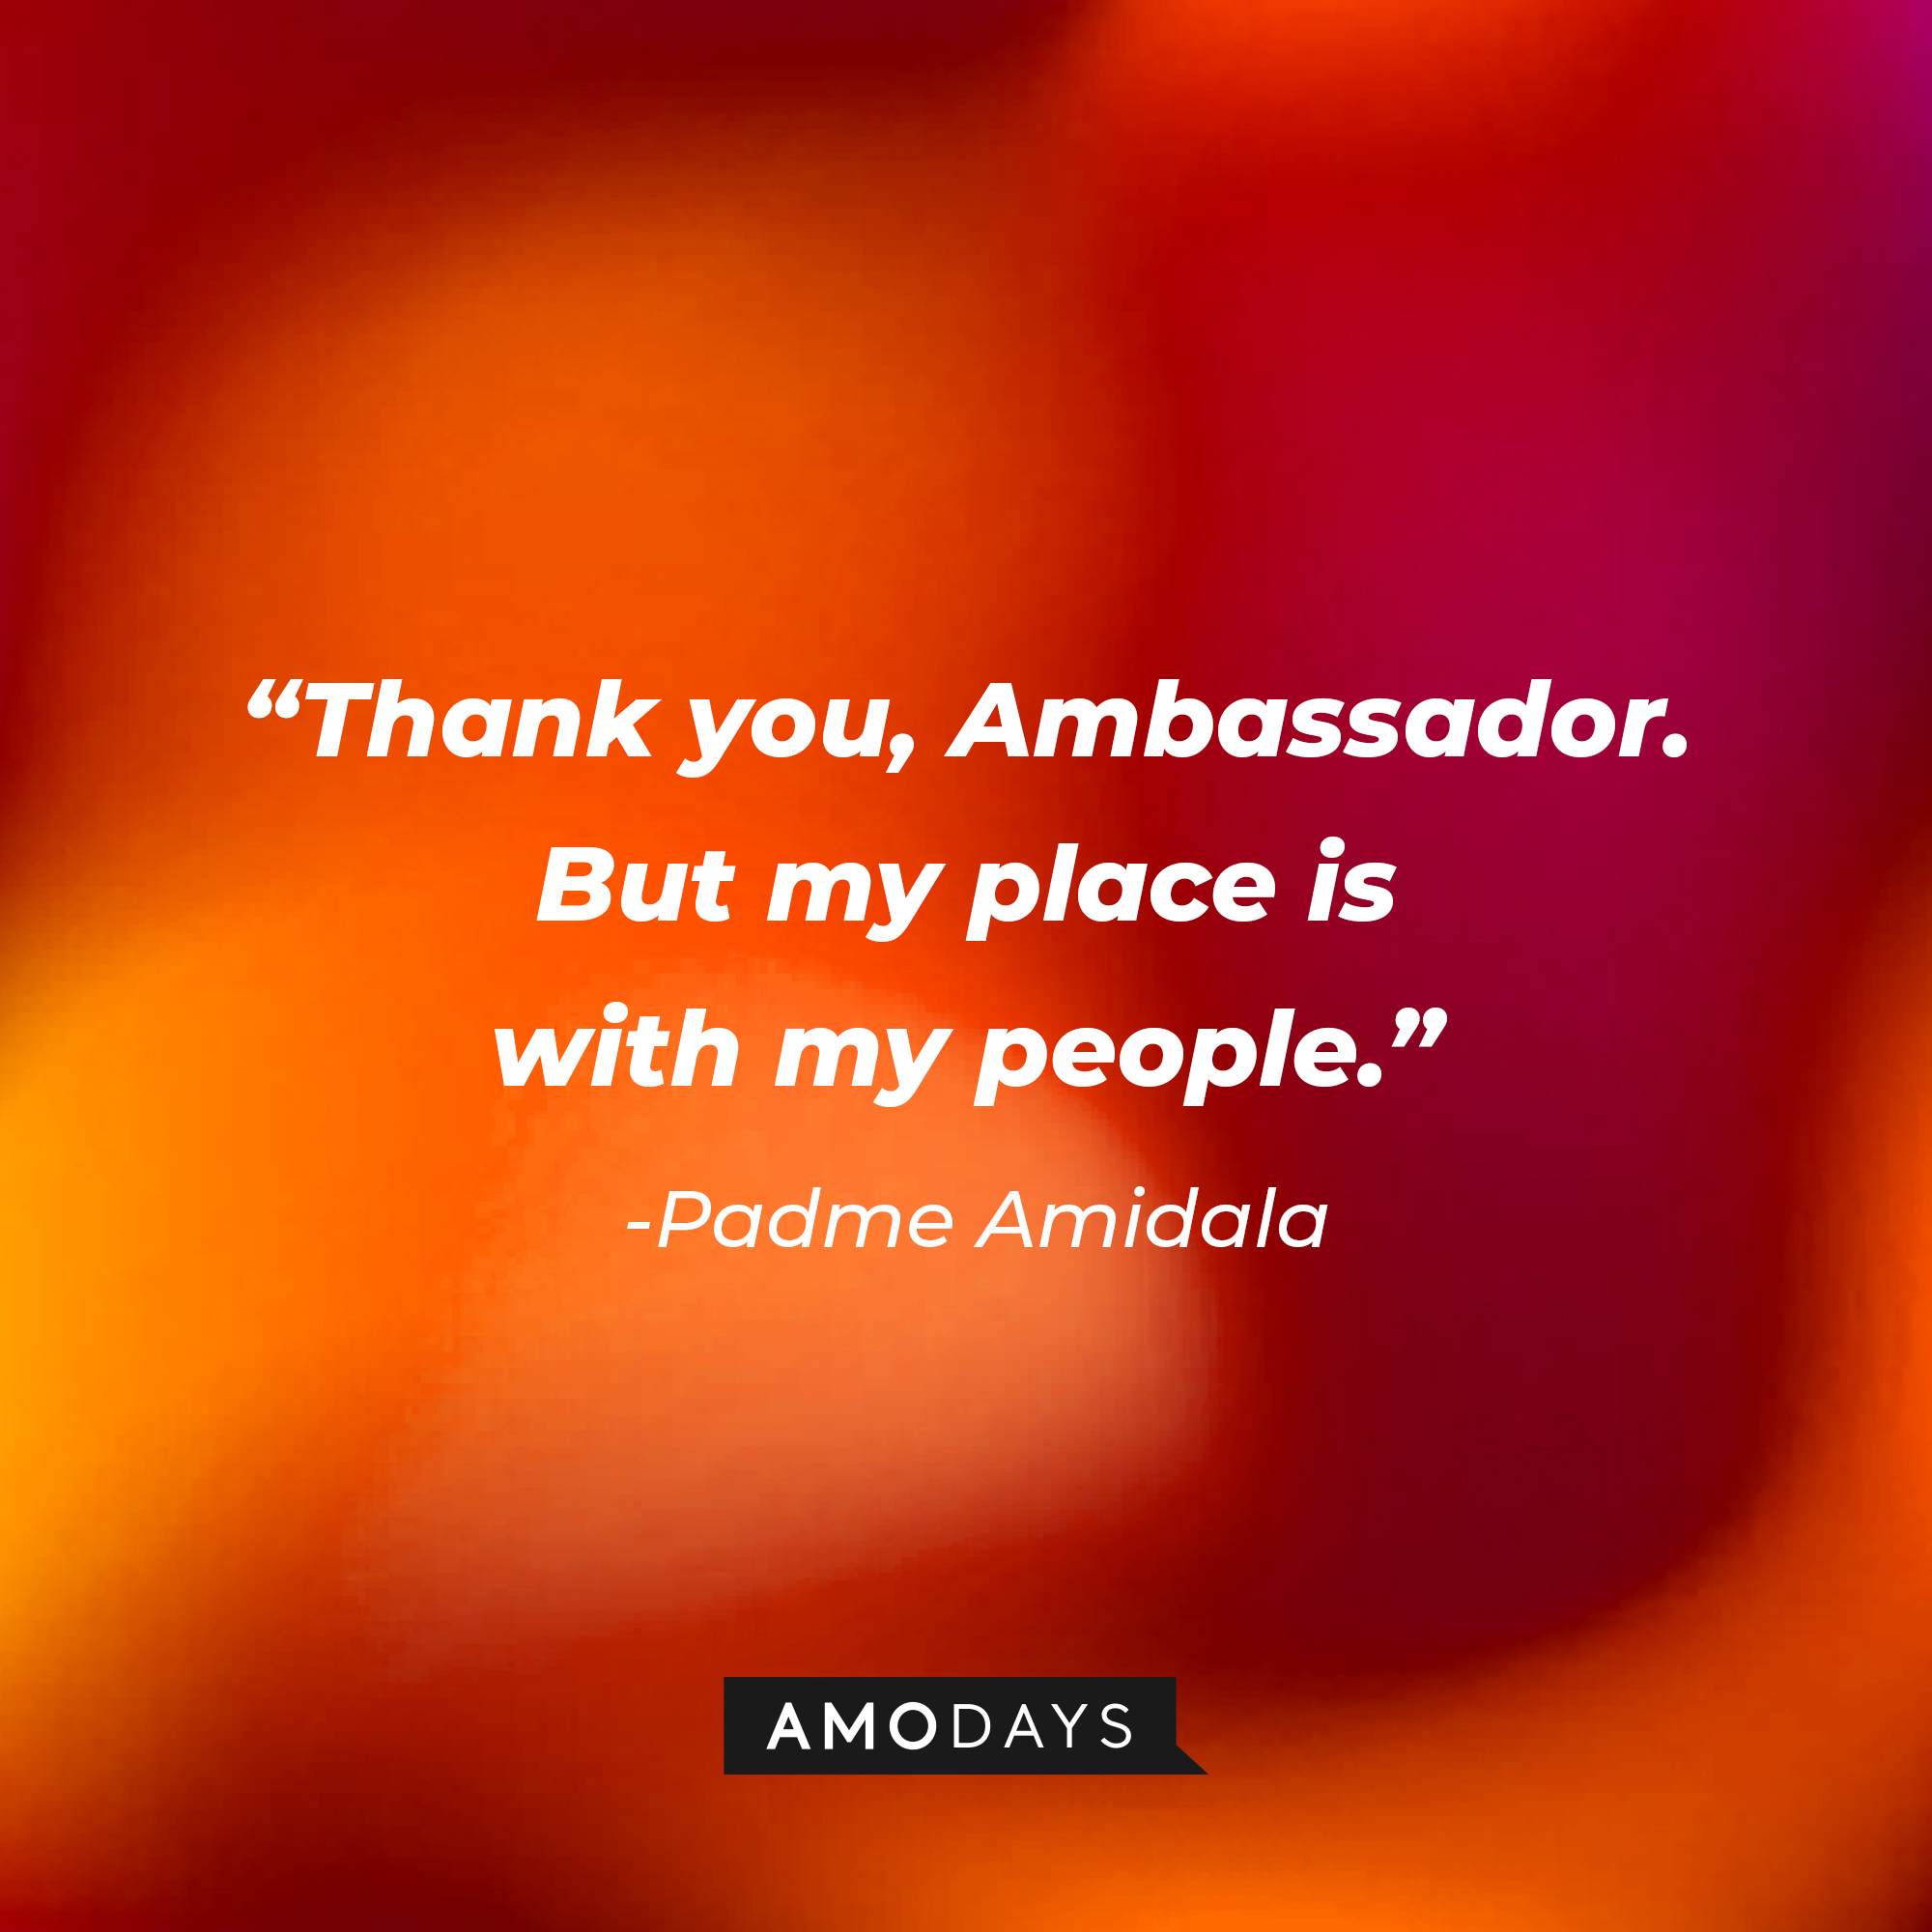 Padme Amidala's quote: "Thank you, Ambassador. But my place is with my people." | Source: AmoDays